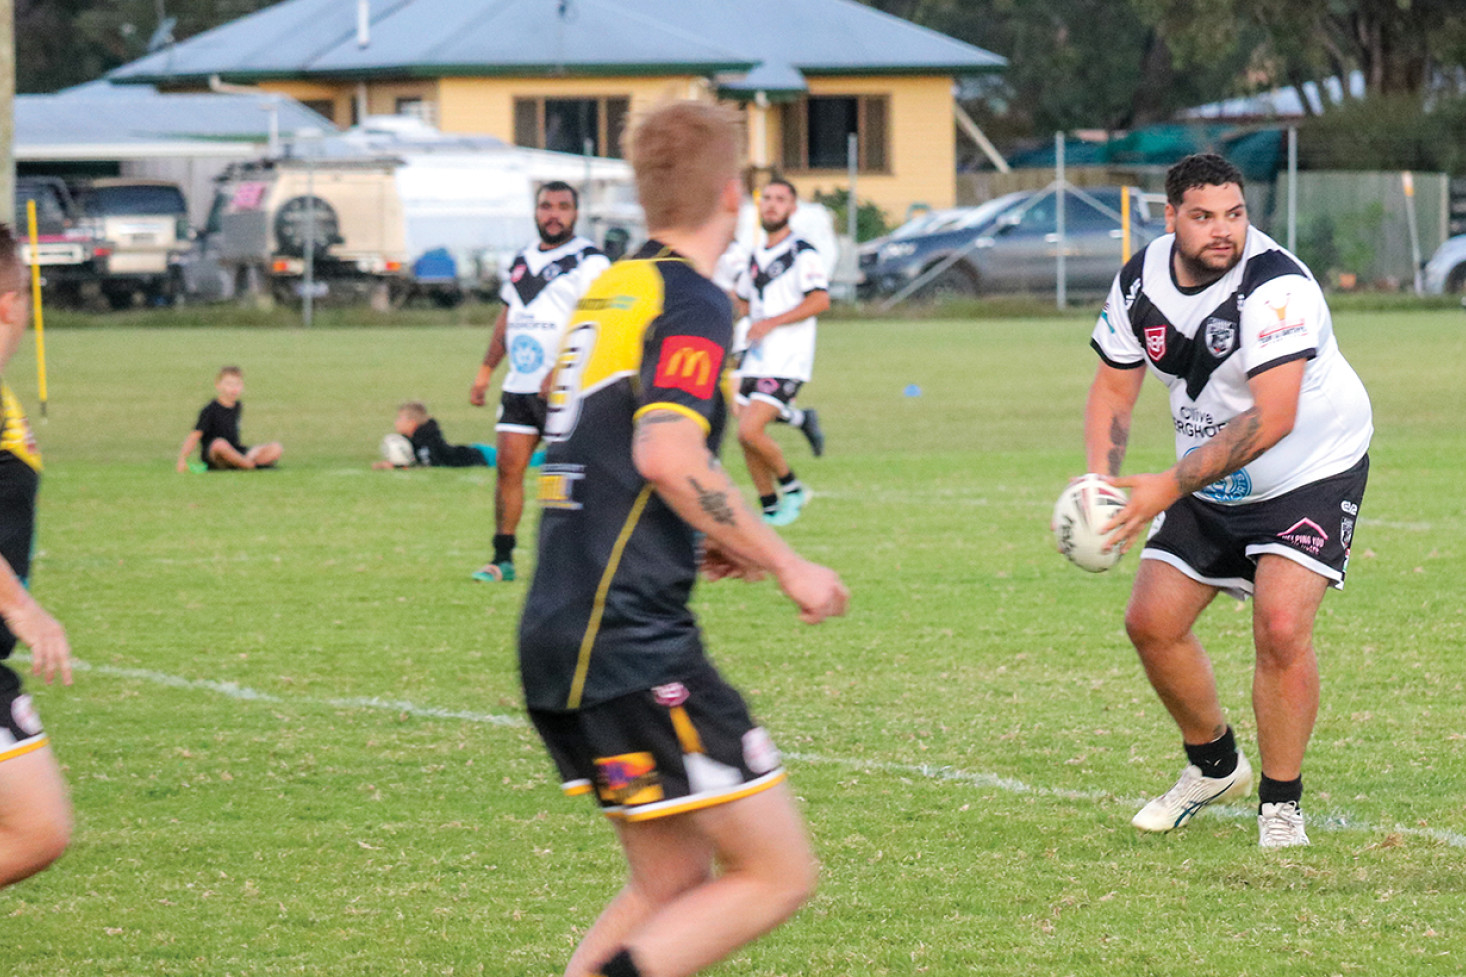 Dylan Crump pushes through a tackle in the reserves game.